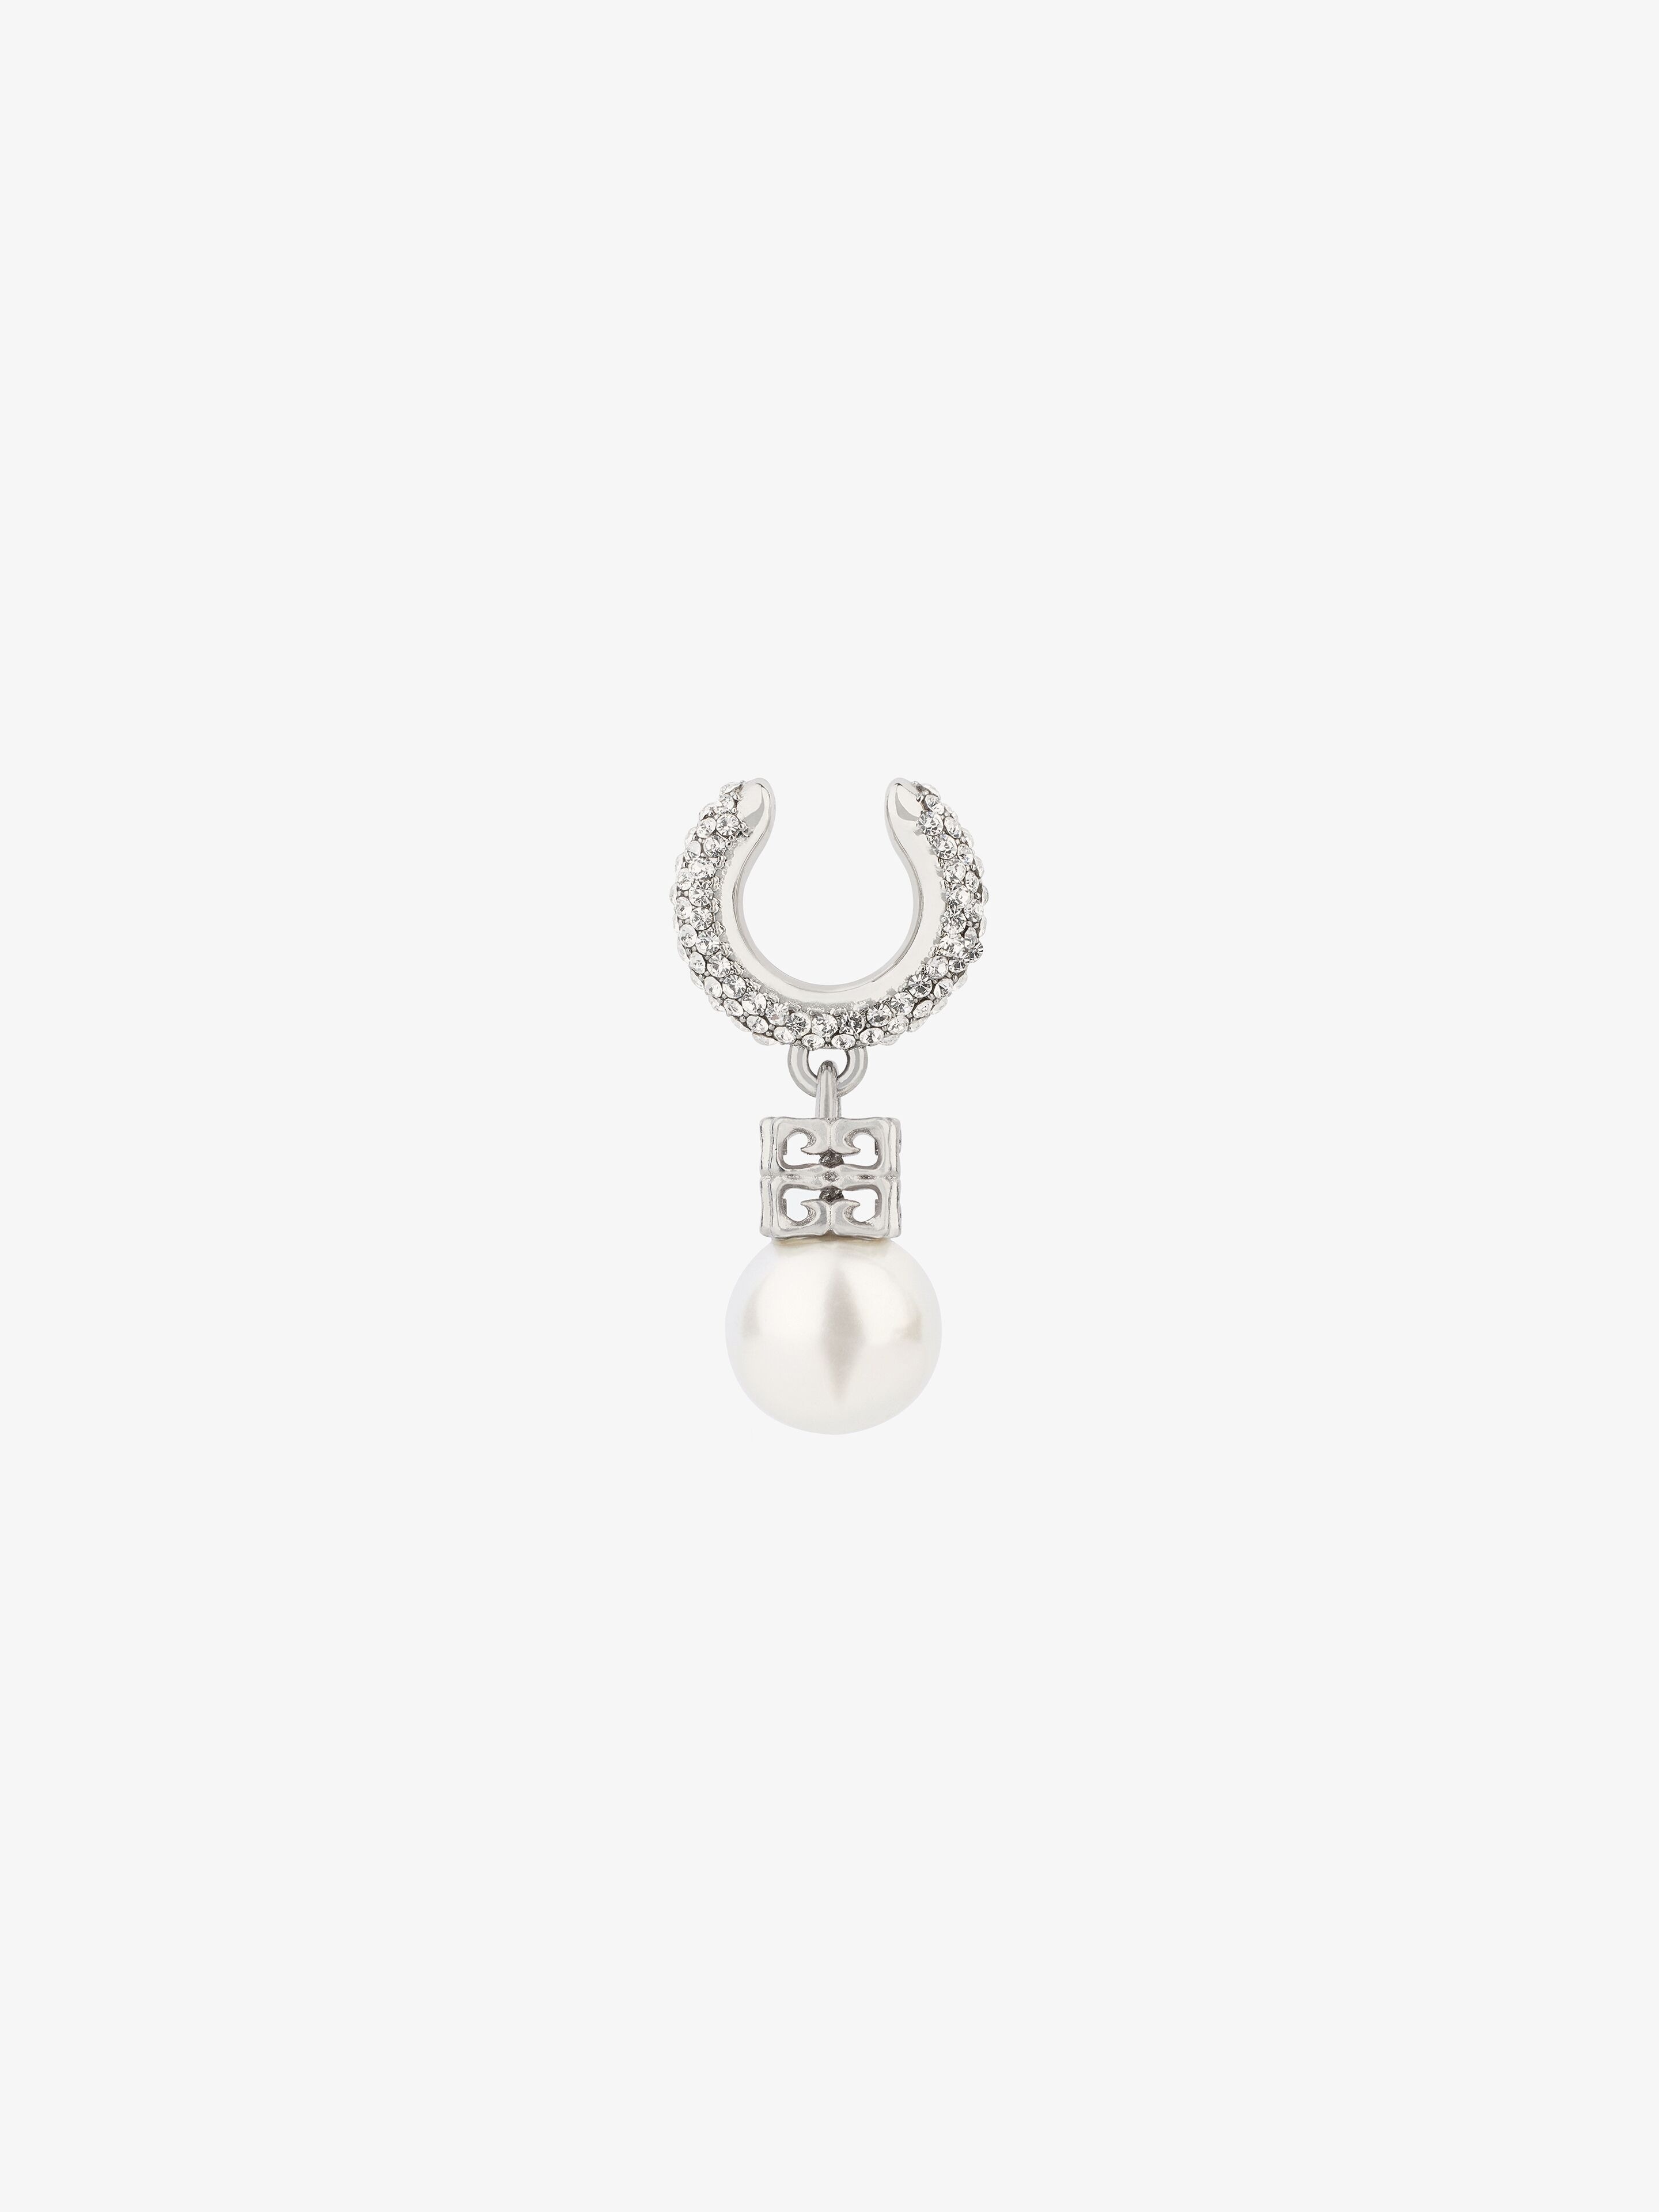 PEARL EARCUFF IN METAL WITH CRYSTALS - 5